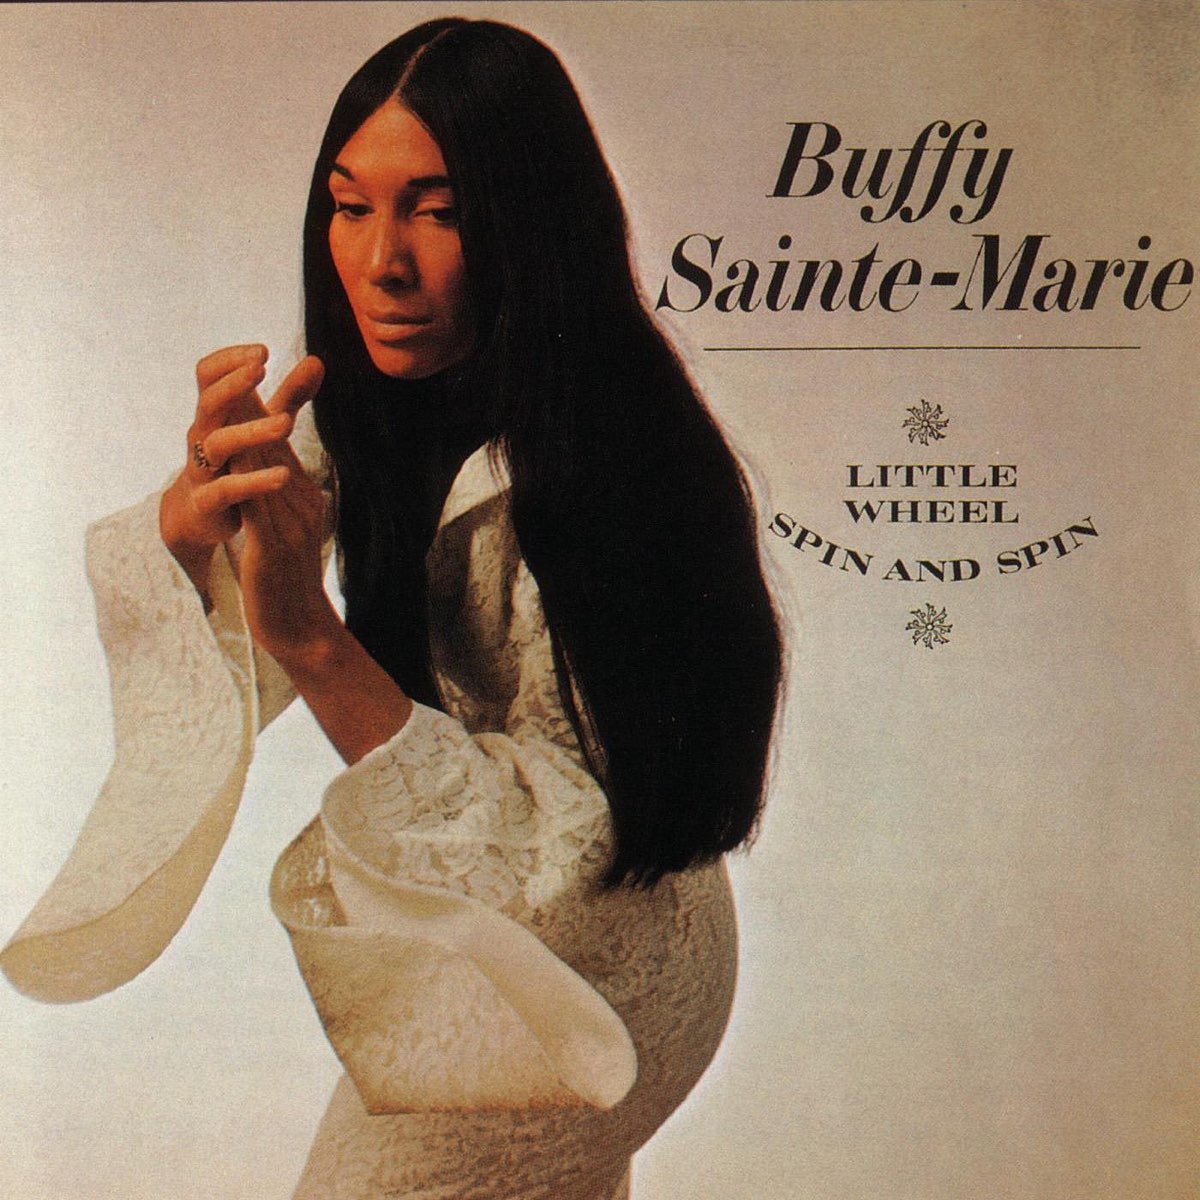 Buffy Sainte-Marie 的 专 辑(Little Wheel Spin and Spin) .